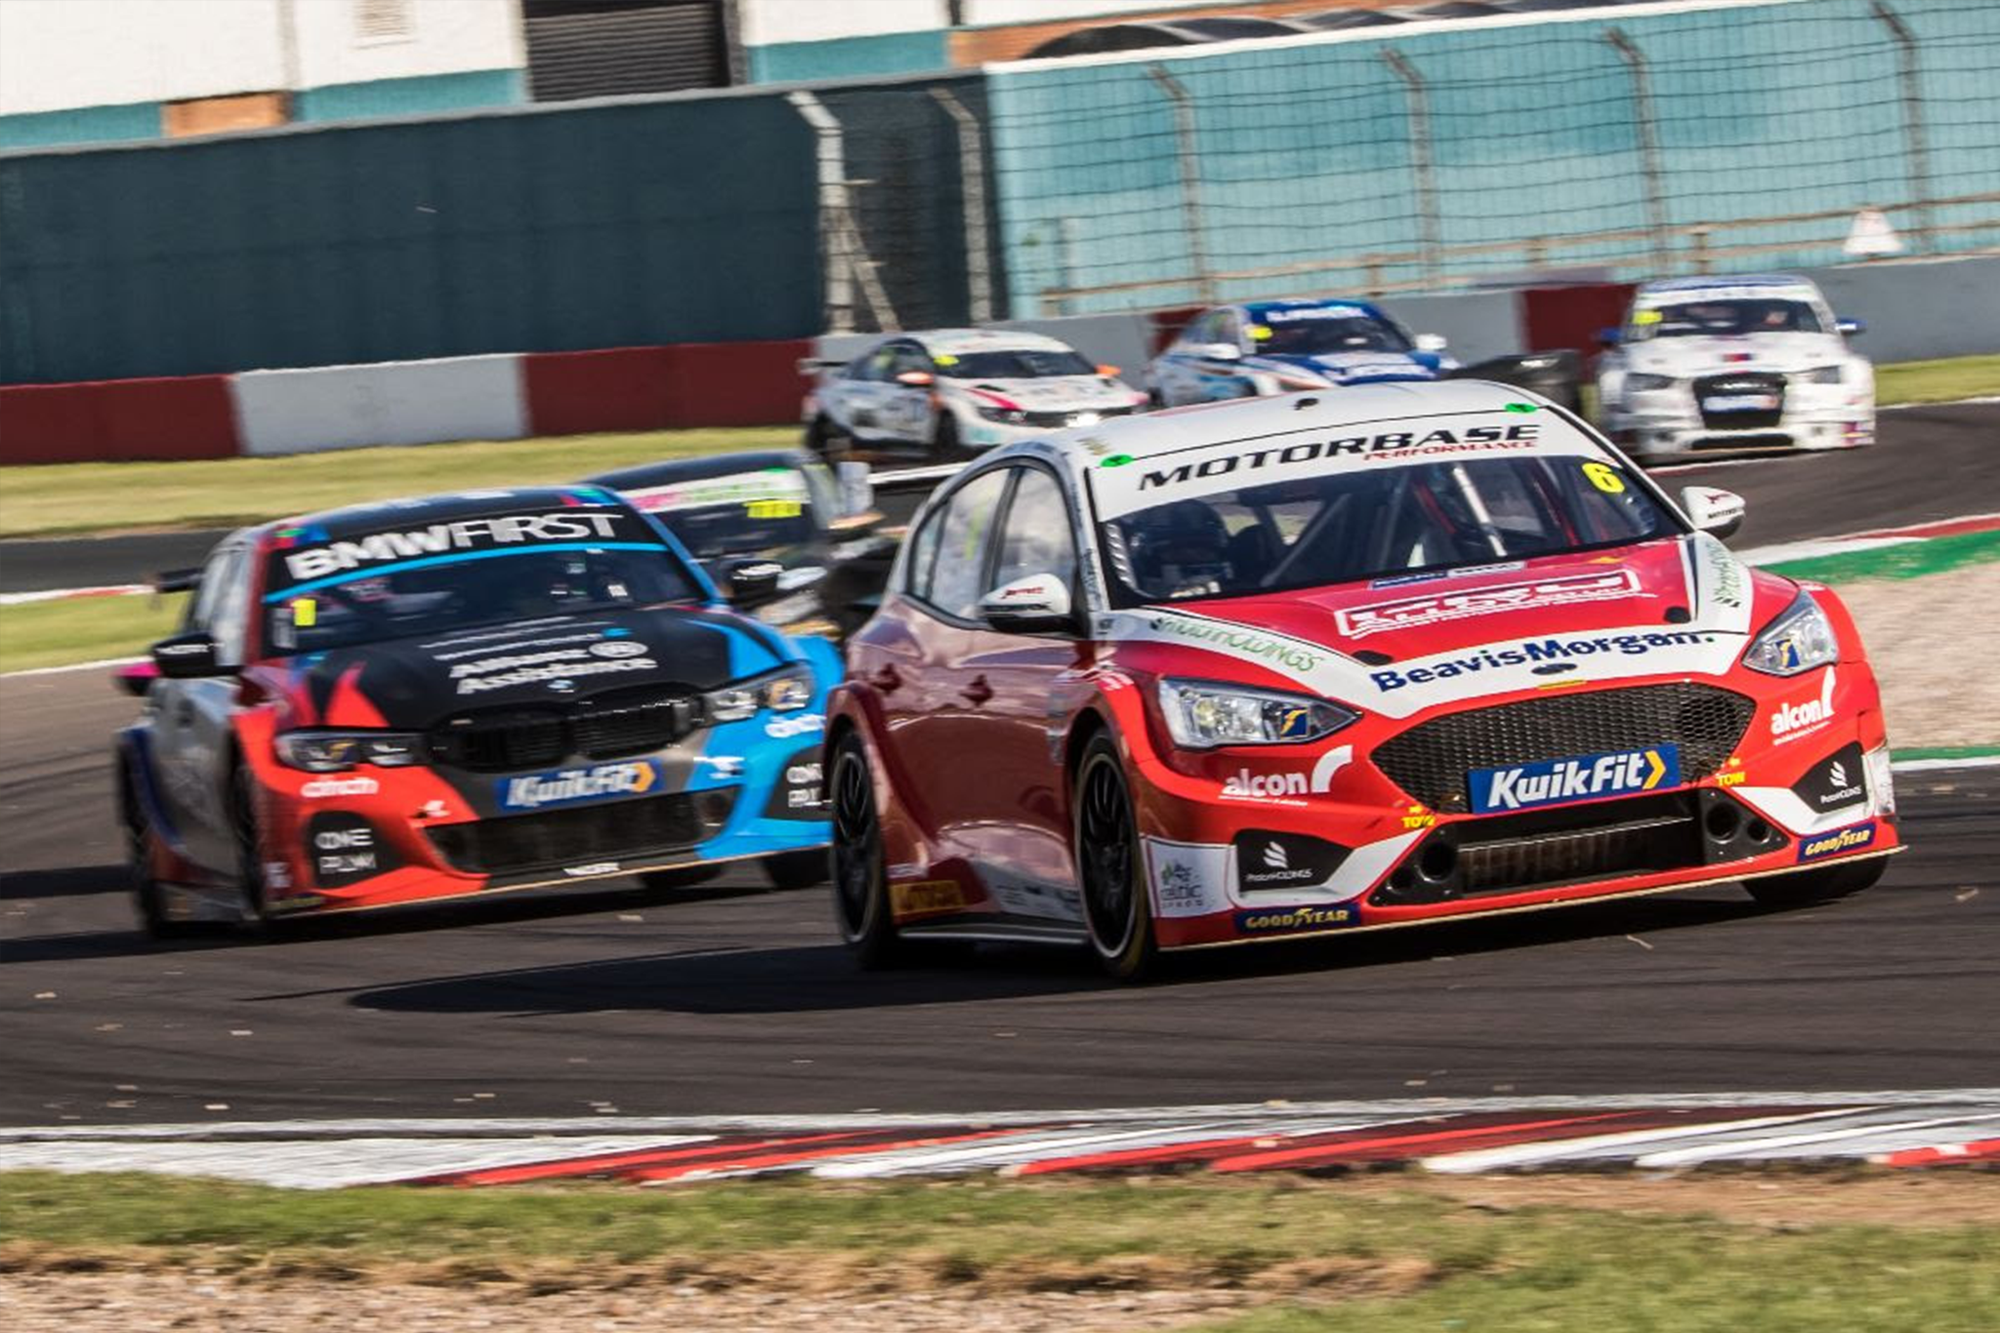 MOTORBASE ON A HIGH AFTER DEBUT PODIUMS FOR NEW FORD FOCUS